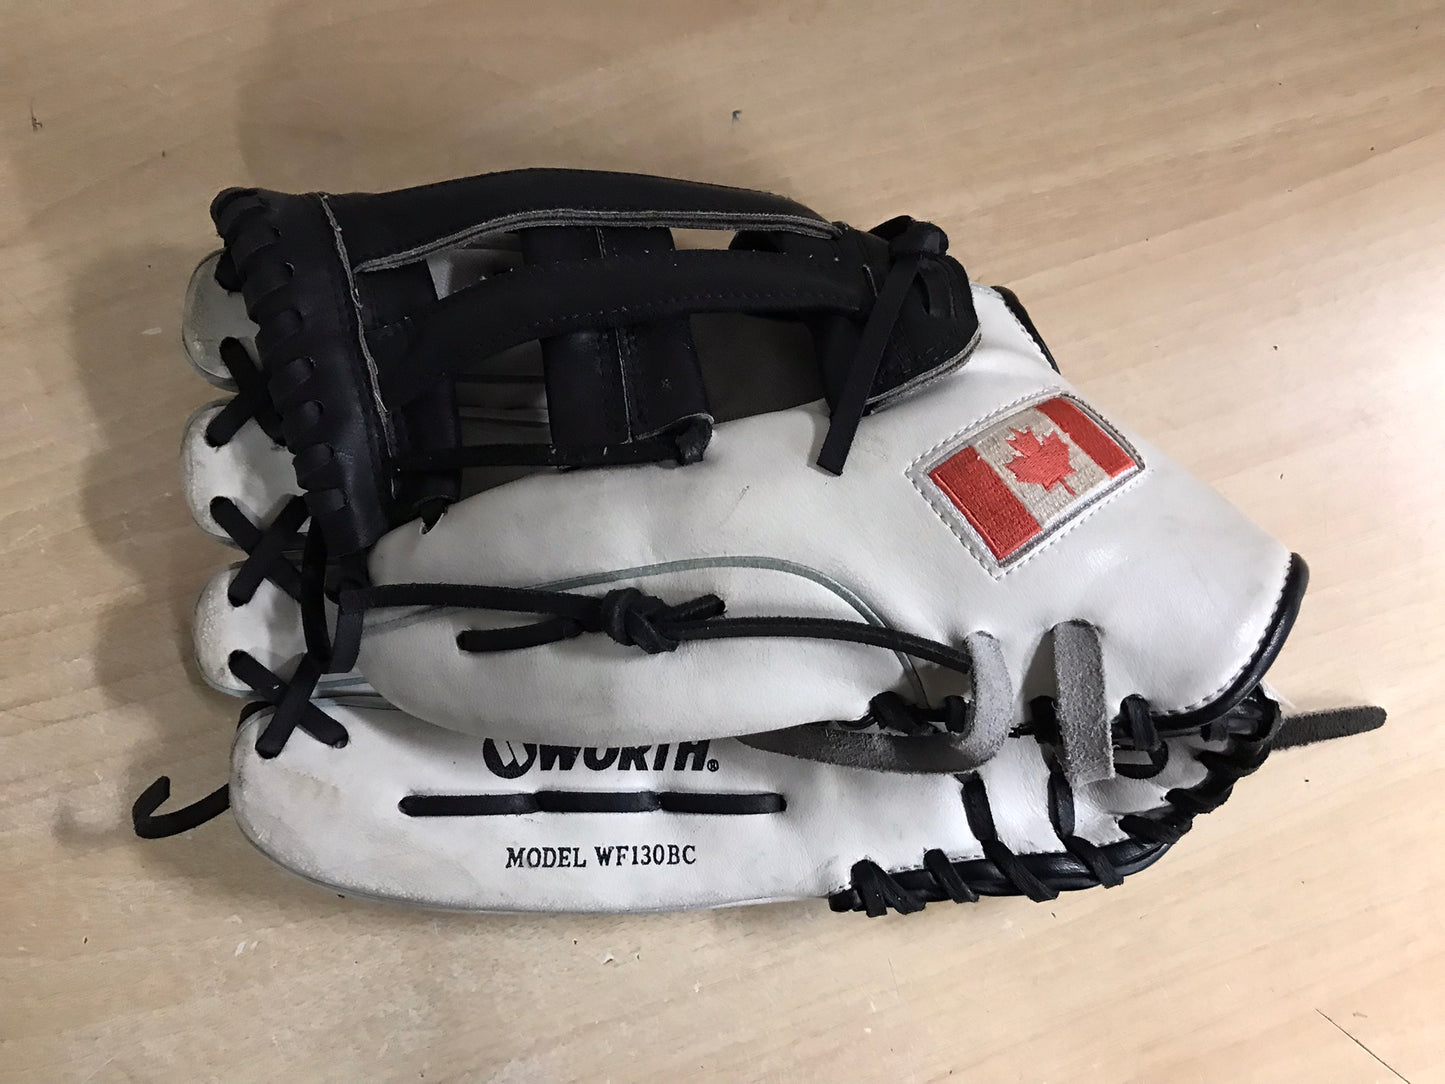 Baseball Glove Adult Size 13 inch Worth Black White Leather Fits on RIGHT Hand